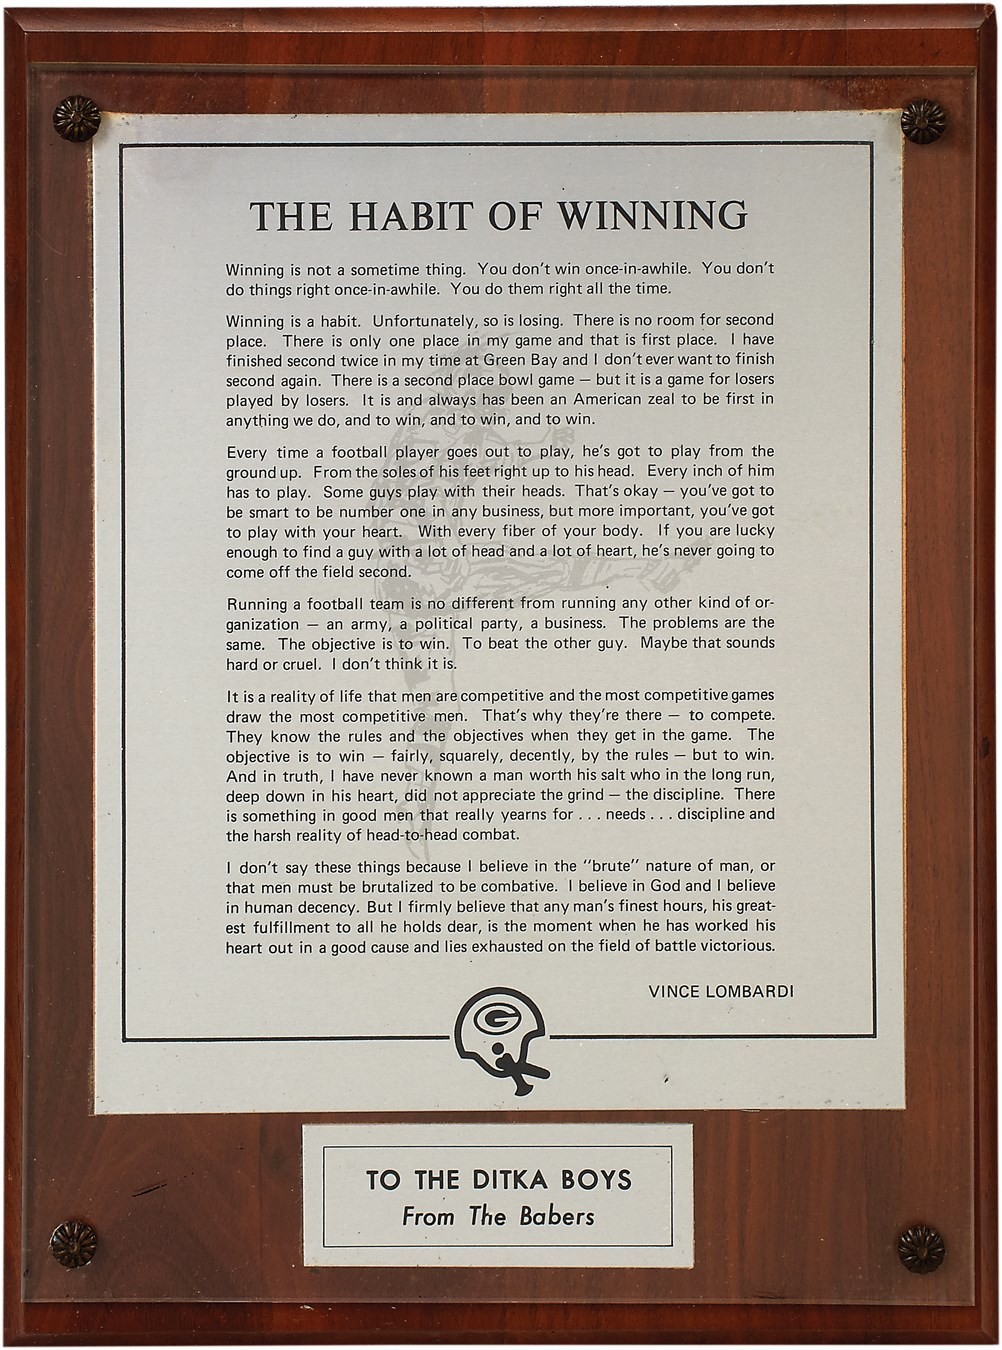 - Vince Lombardi "The Habit of Winning" Declaration to Mike Ditka